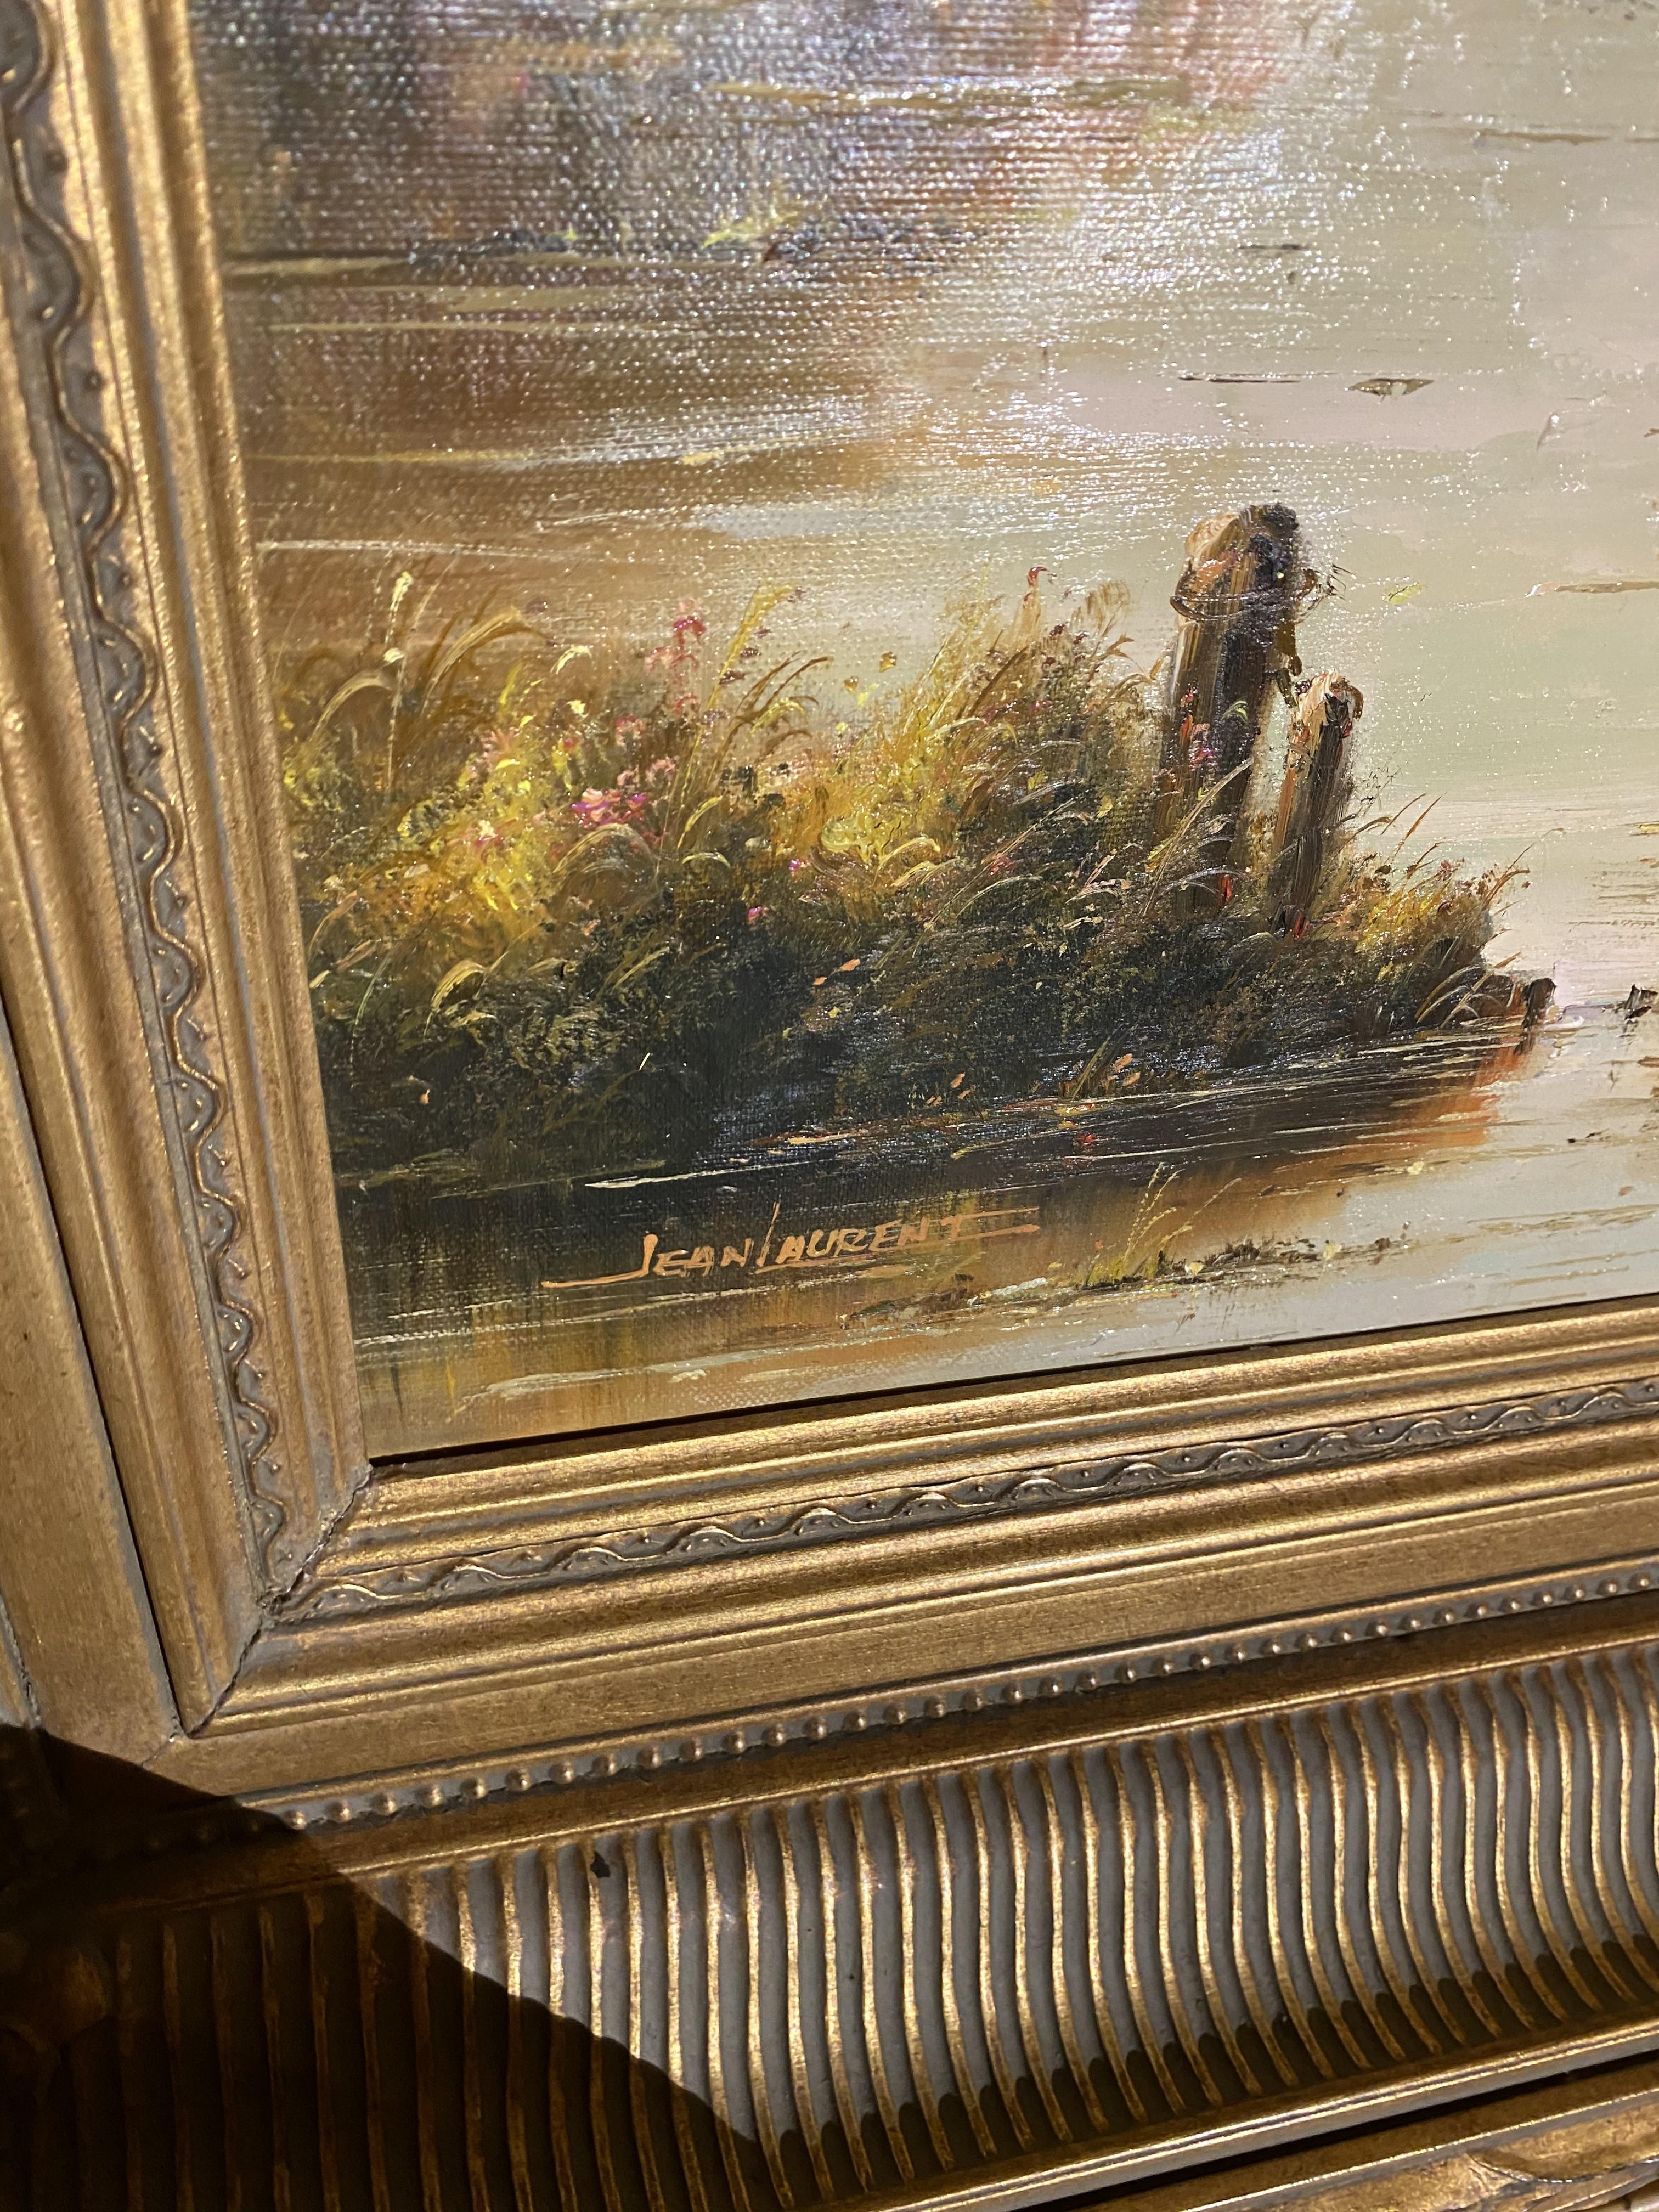 Vintage Oil on Canvas Painting in Frame